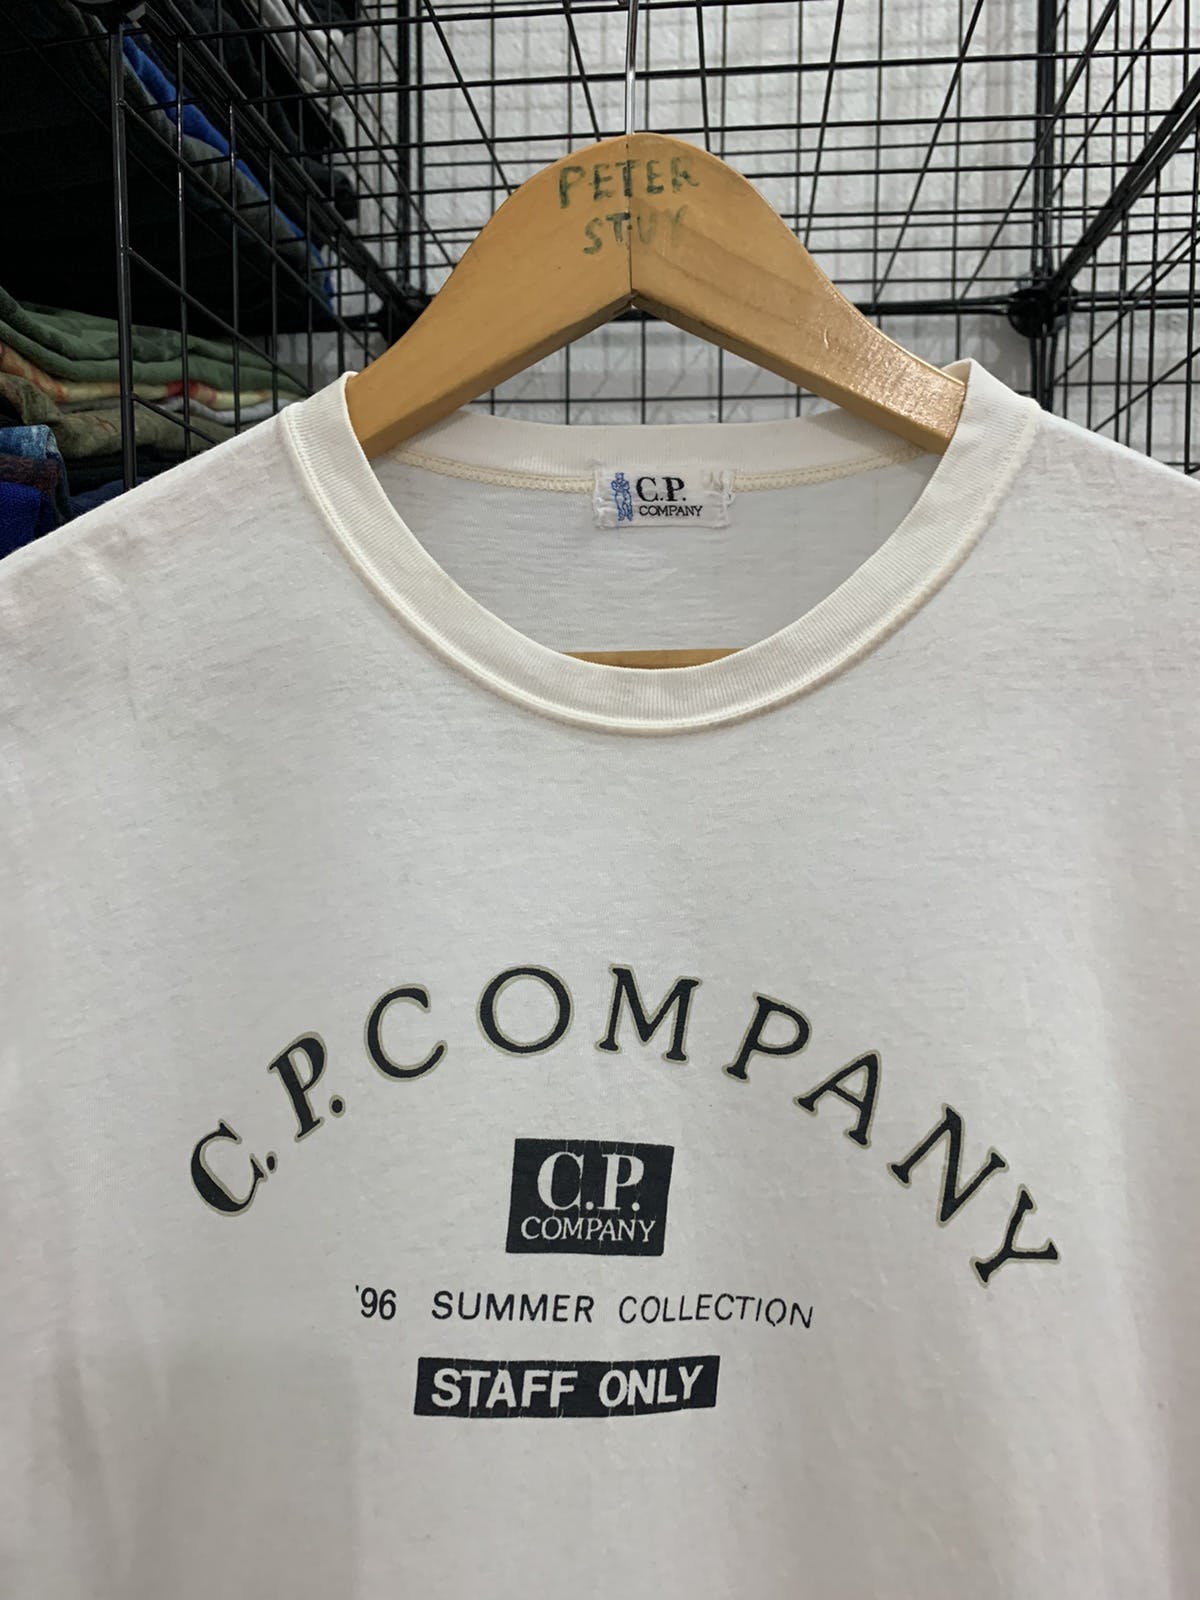 CP COMPANY 1996 SUMMER COLLECTION STAFF ONLY T-SHIRT - 2